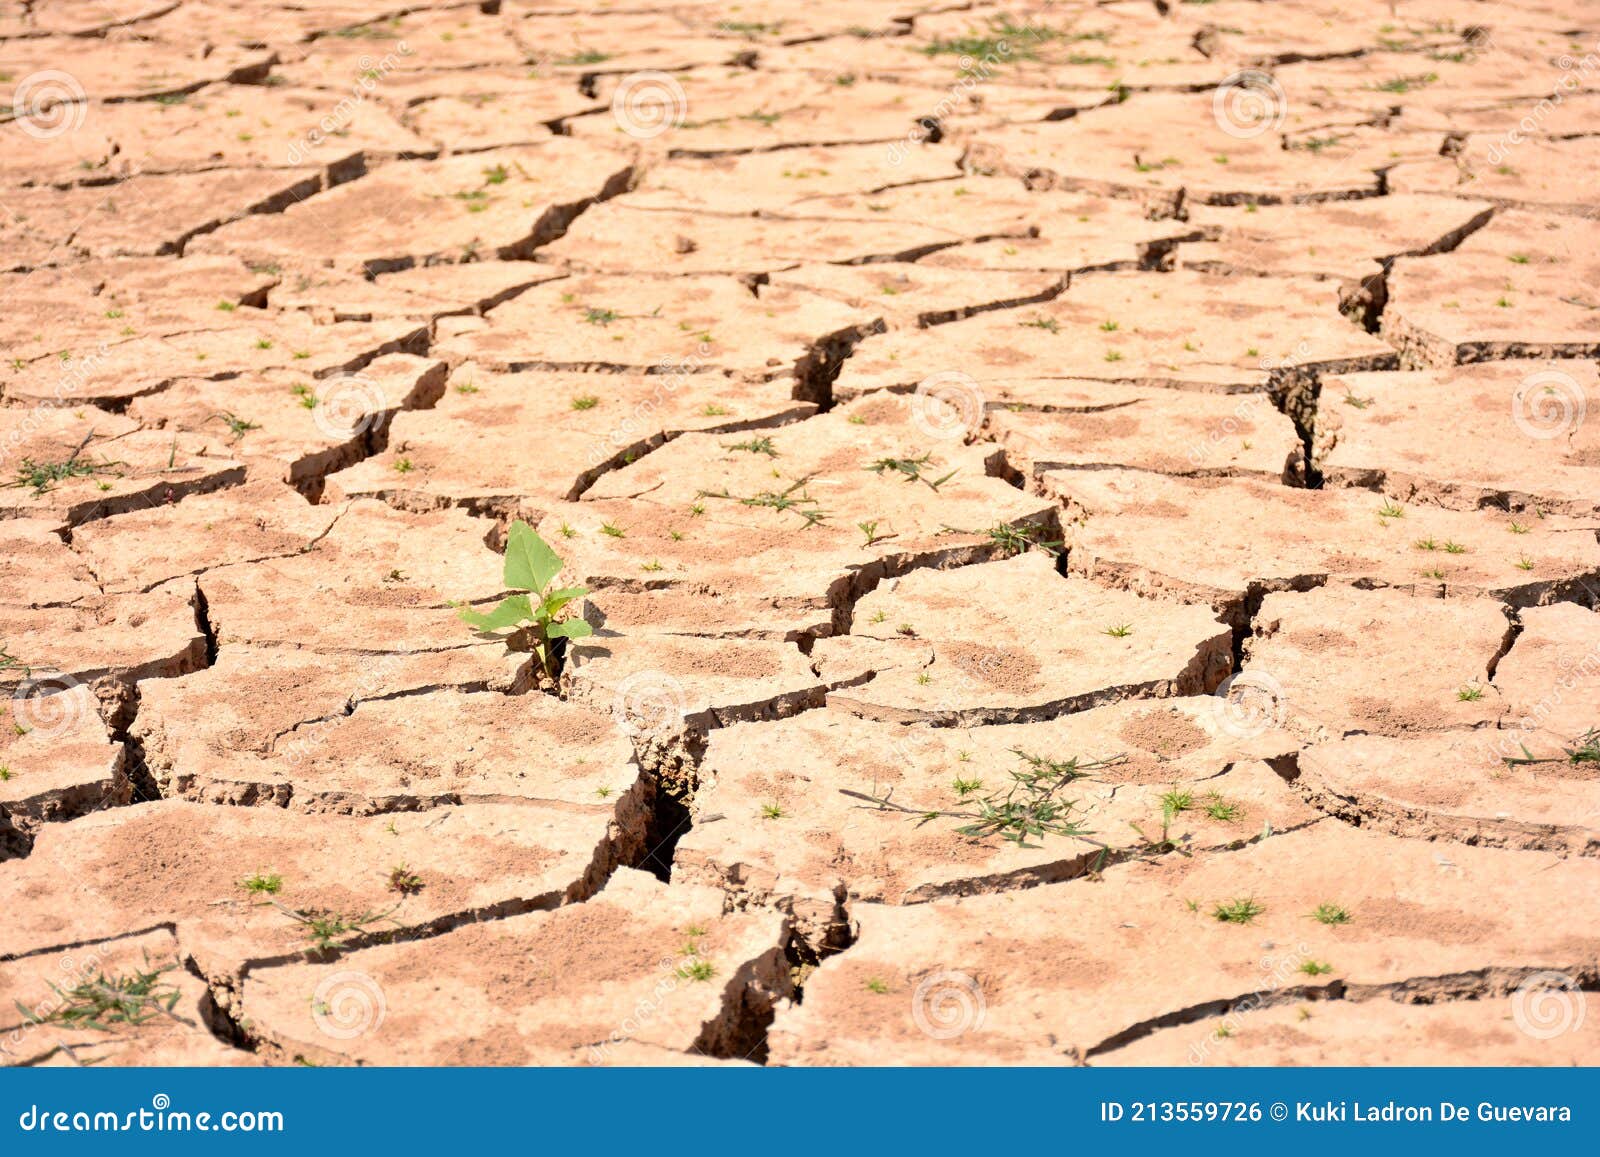 cracks in soil due to drought